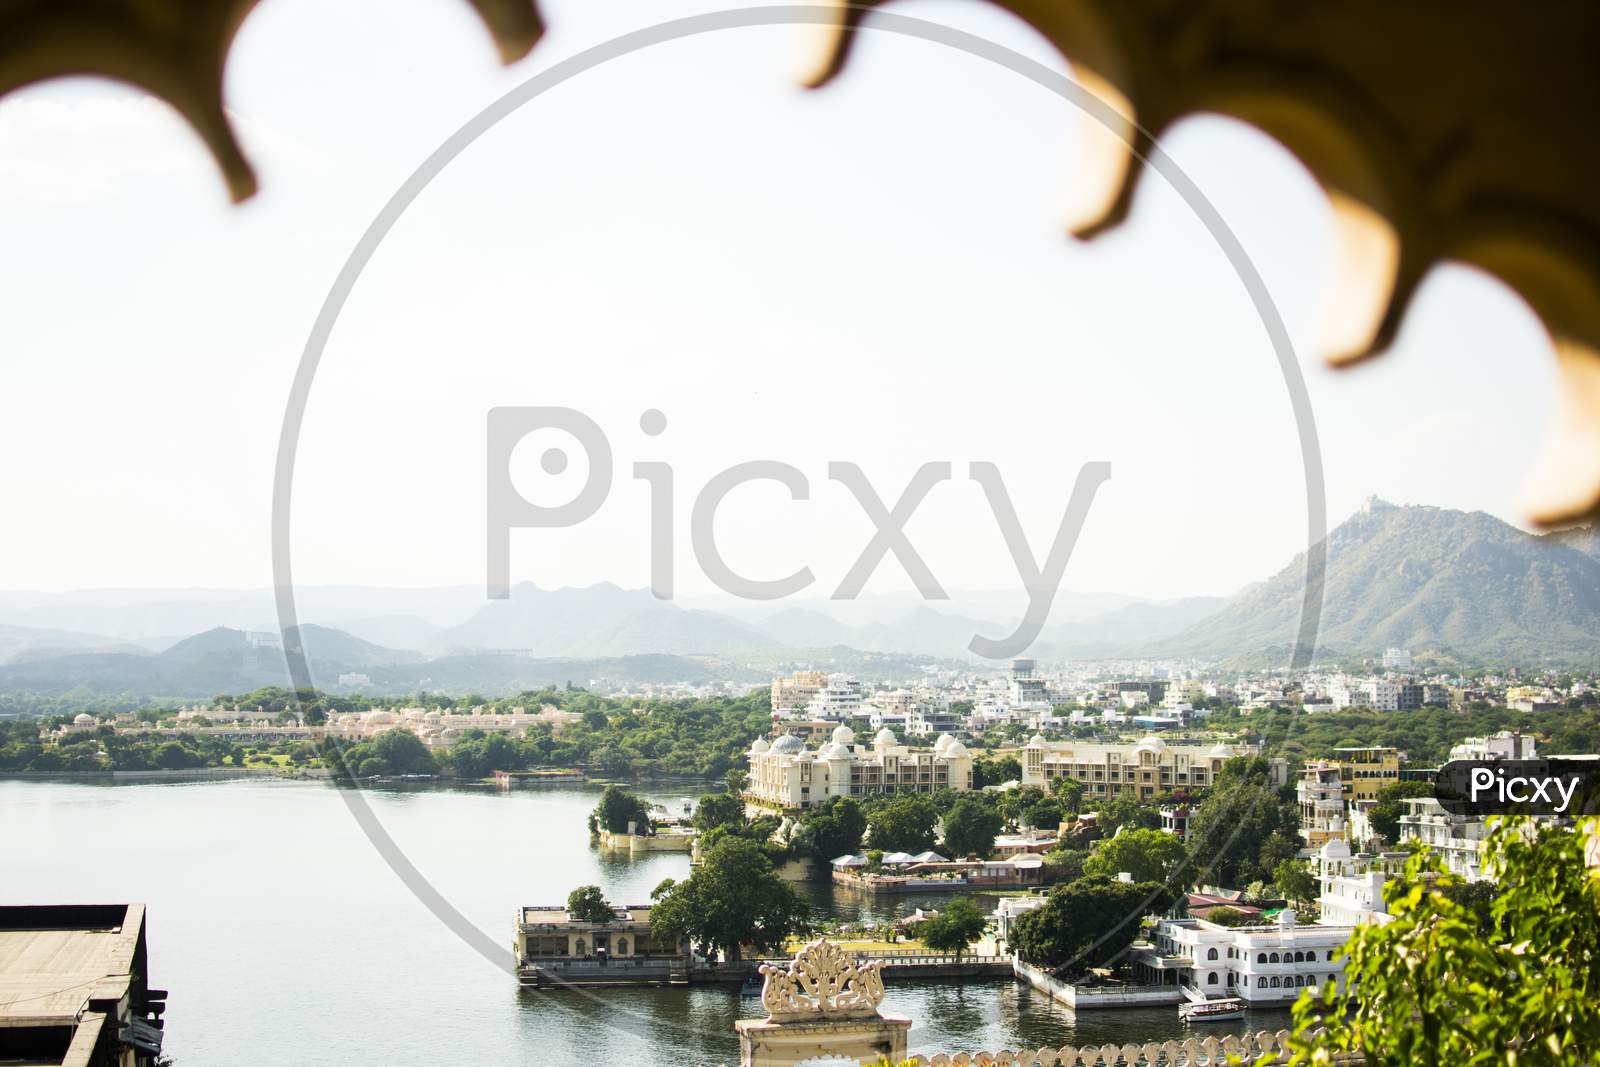 Pichola Lake Is Situated In Udaipur City In The Indian State Of Rajasthan